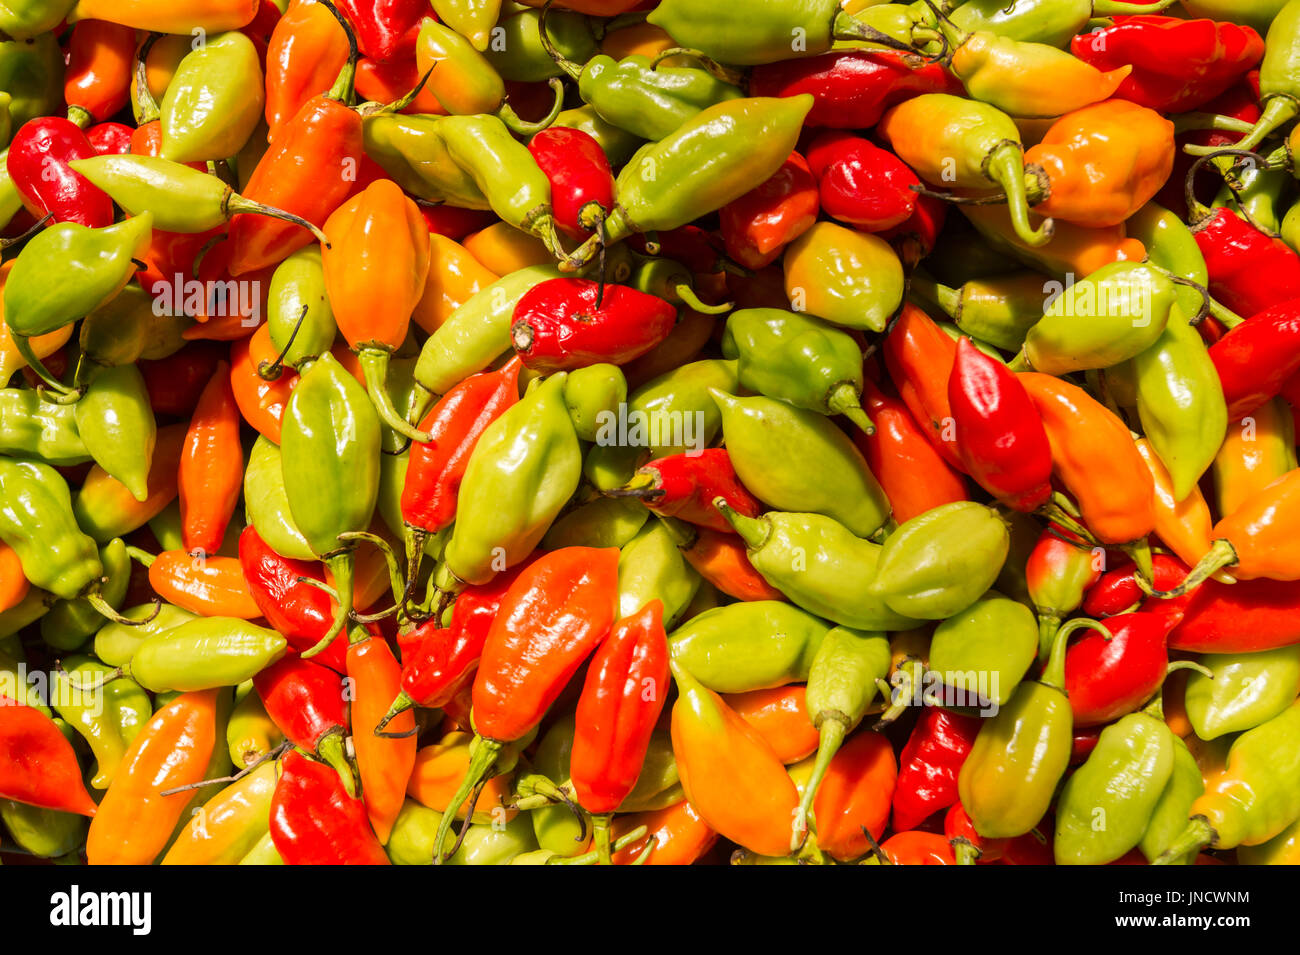 Many habanero chili peppers at the market in Martinique Stock Photo